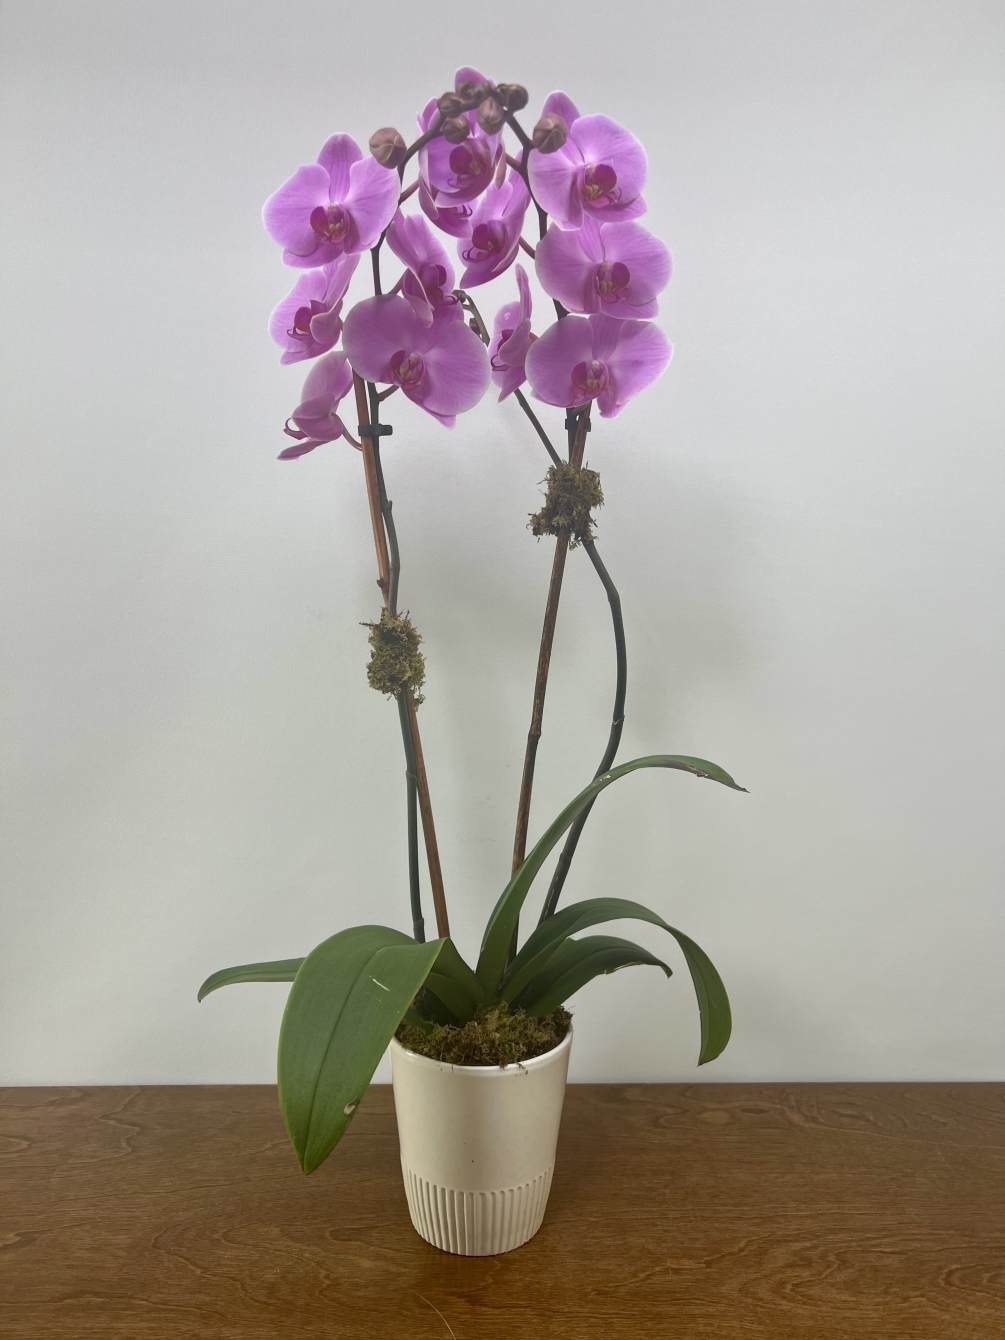 The long stems and large blooms featured in this double spike Phalaenopsis